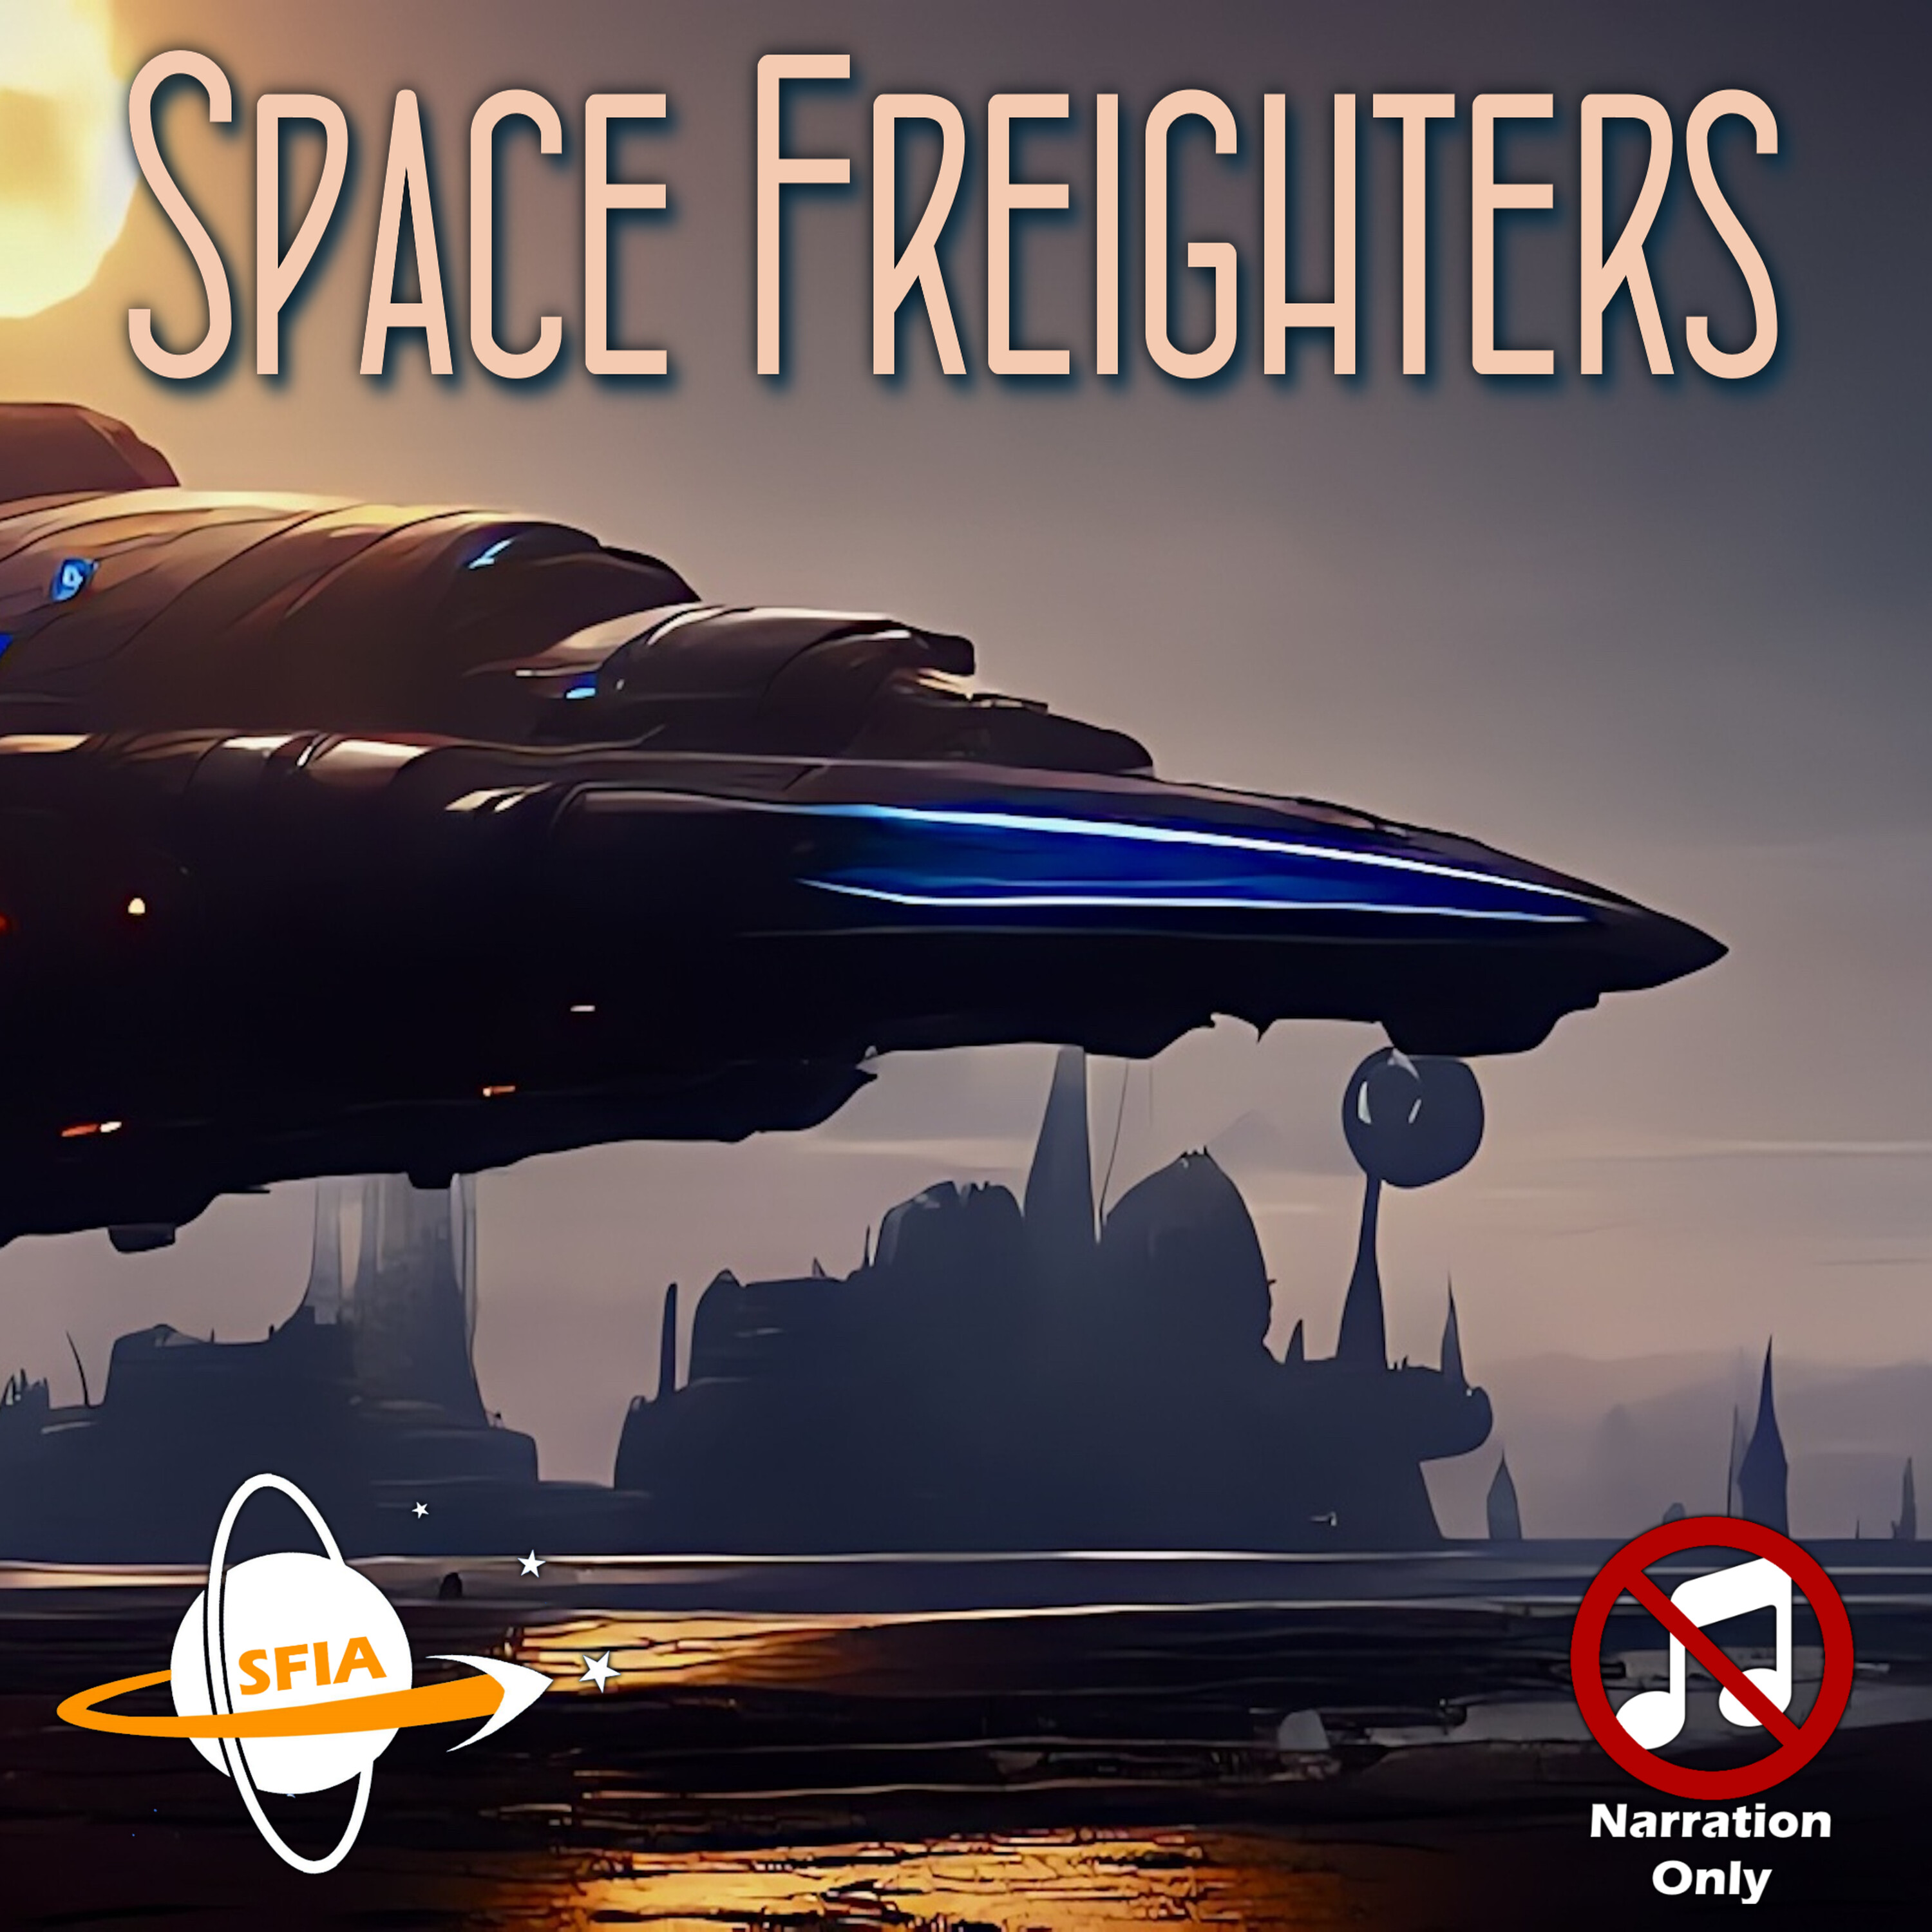 Space Freighters, Cargos & Crews (Narration Only)